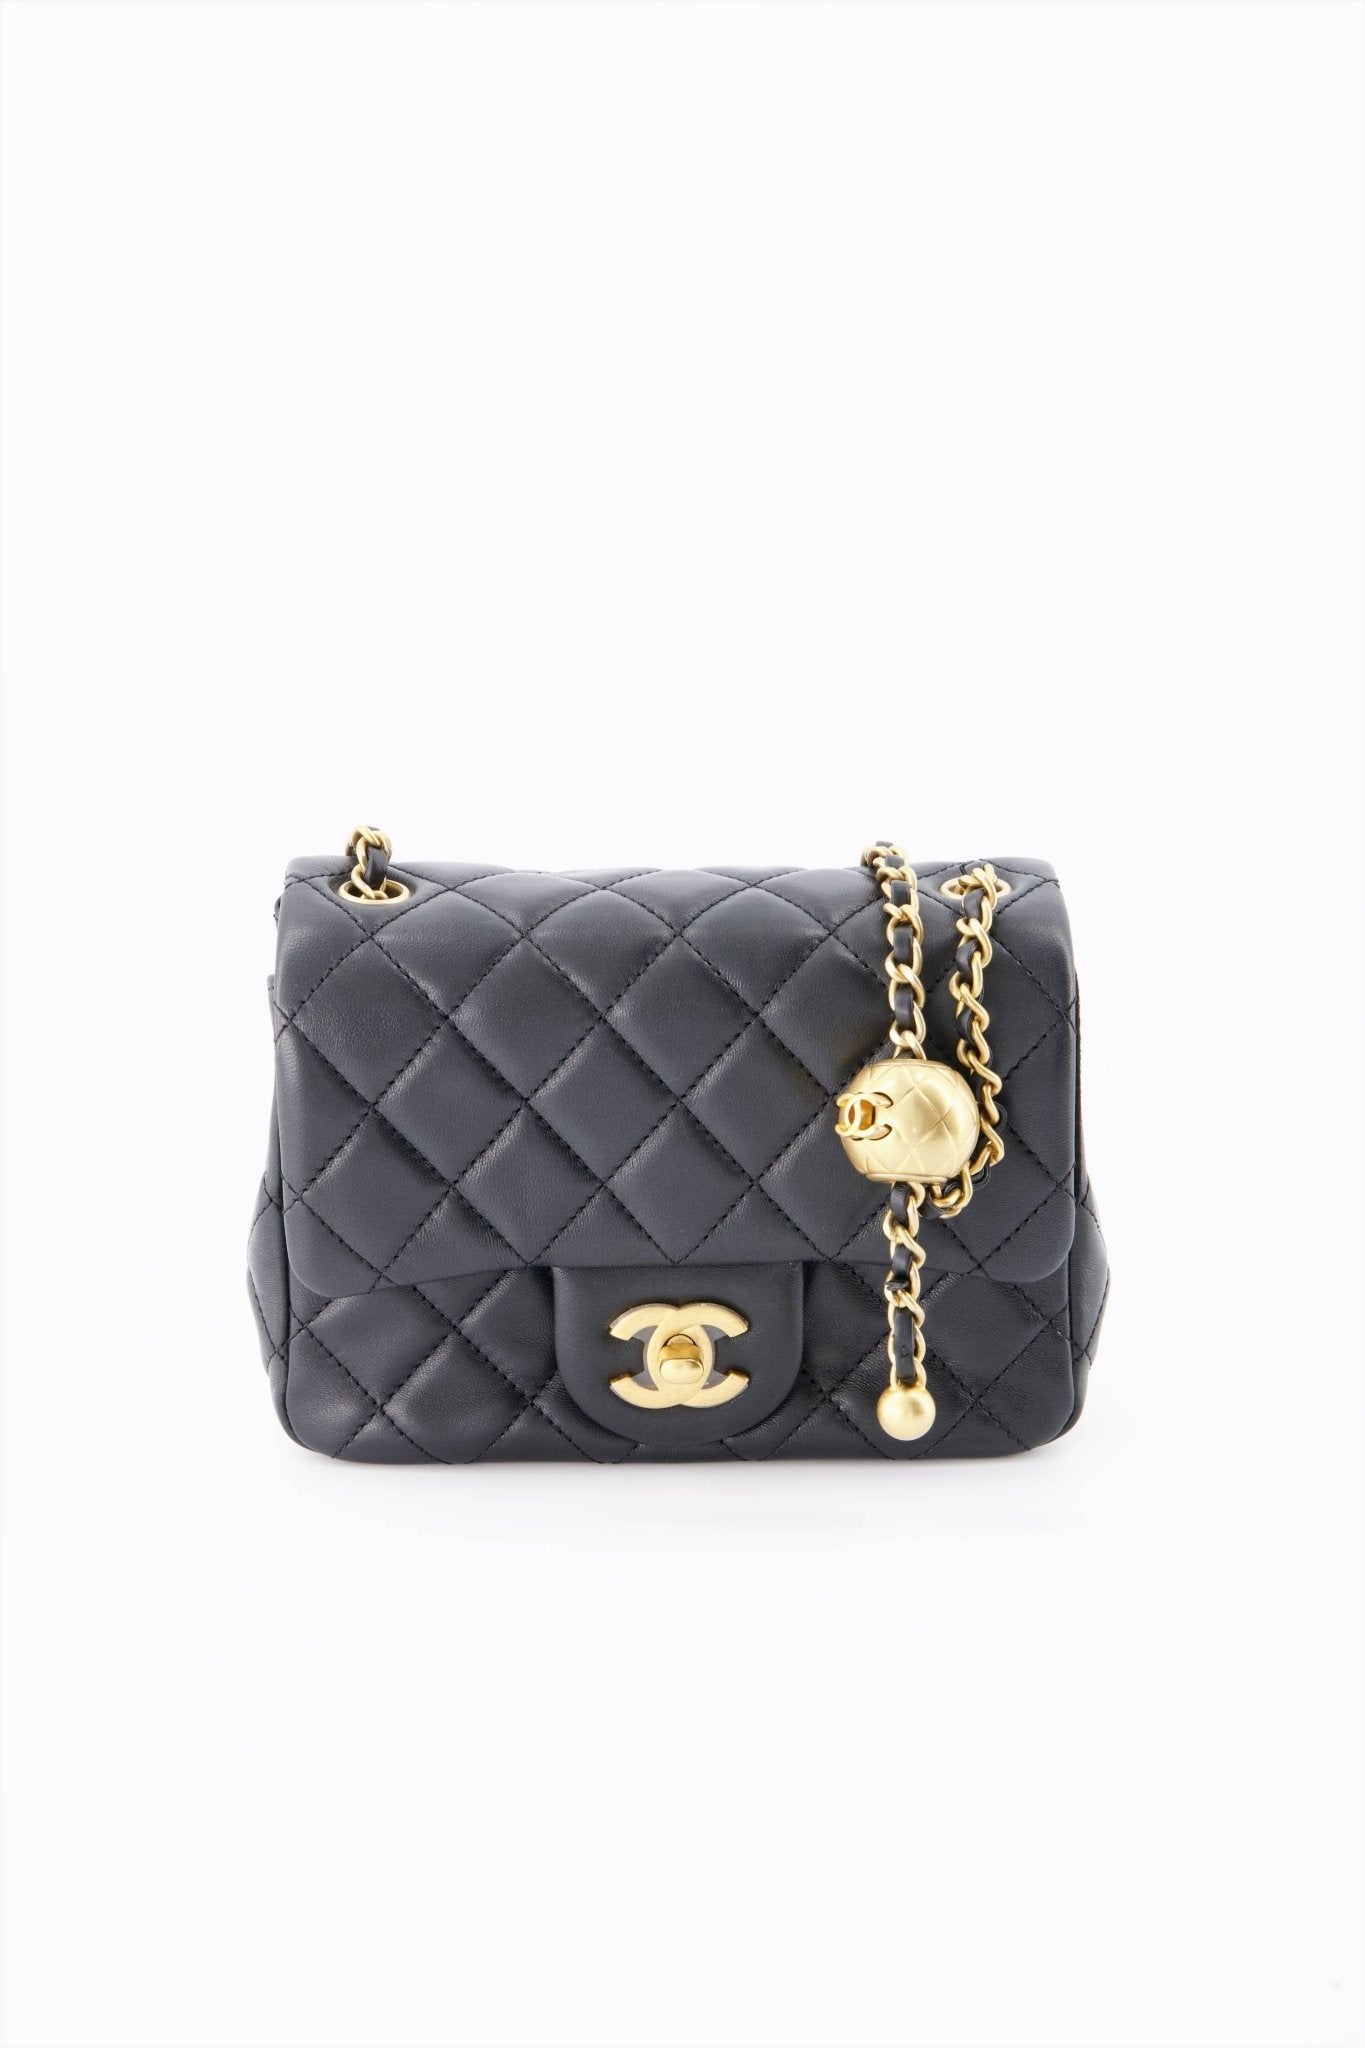 Chanel Mini Bags & Flap Bags On Sale